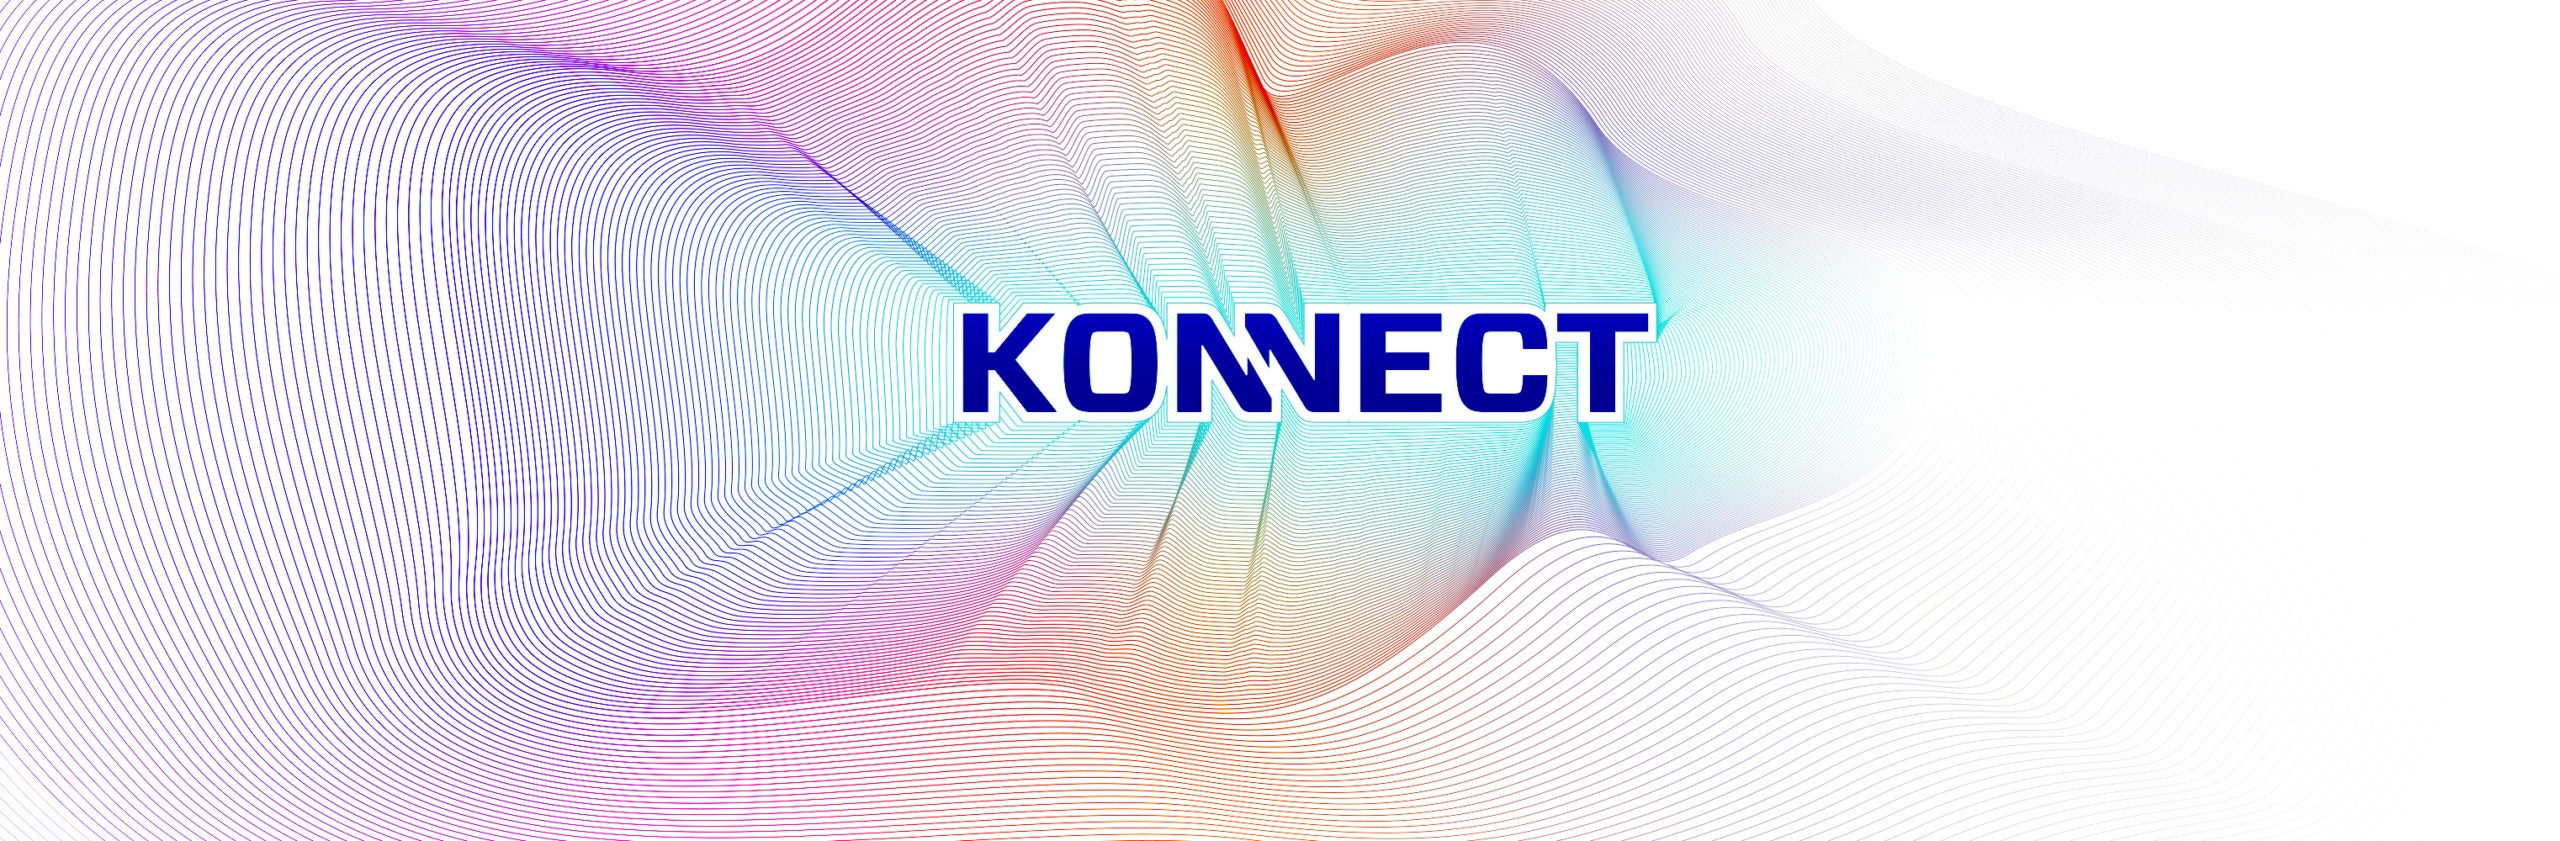 Kong Konnect Plus: Accessible Connectivity for All